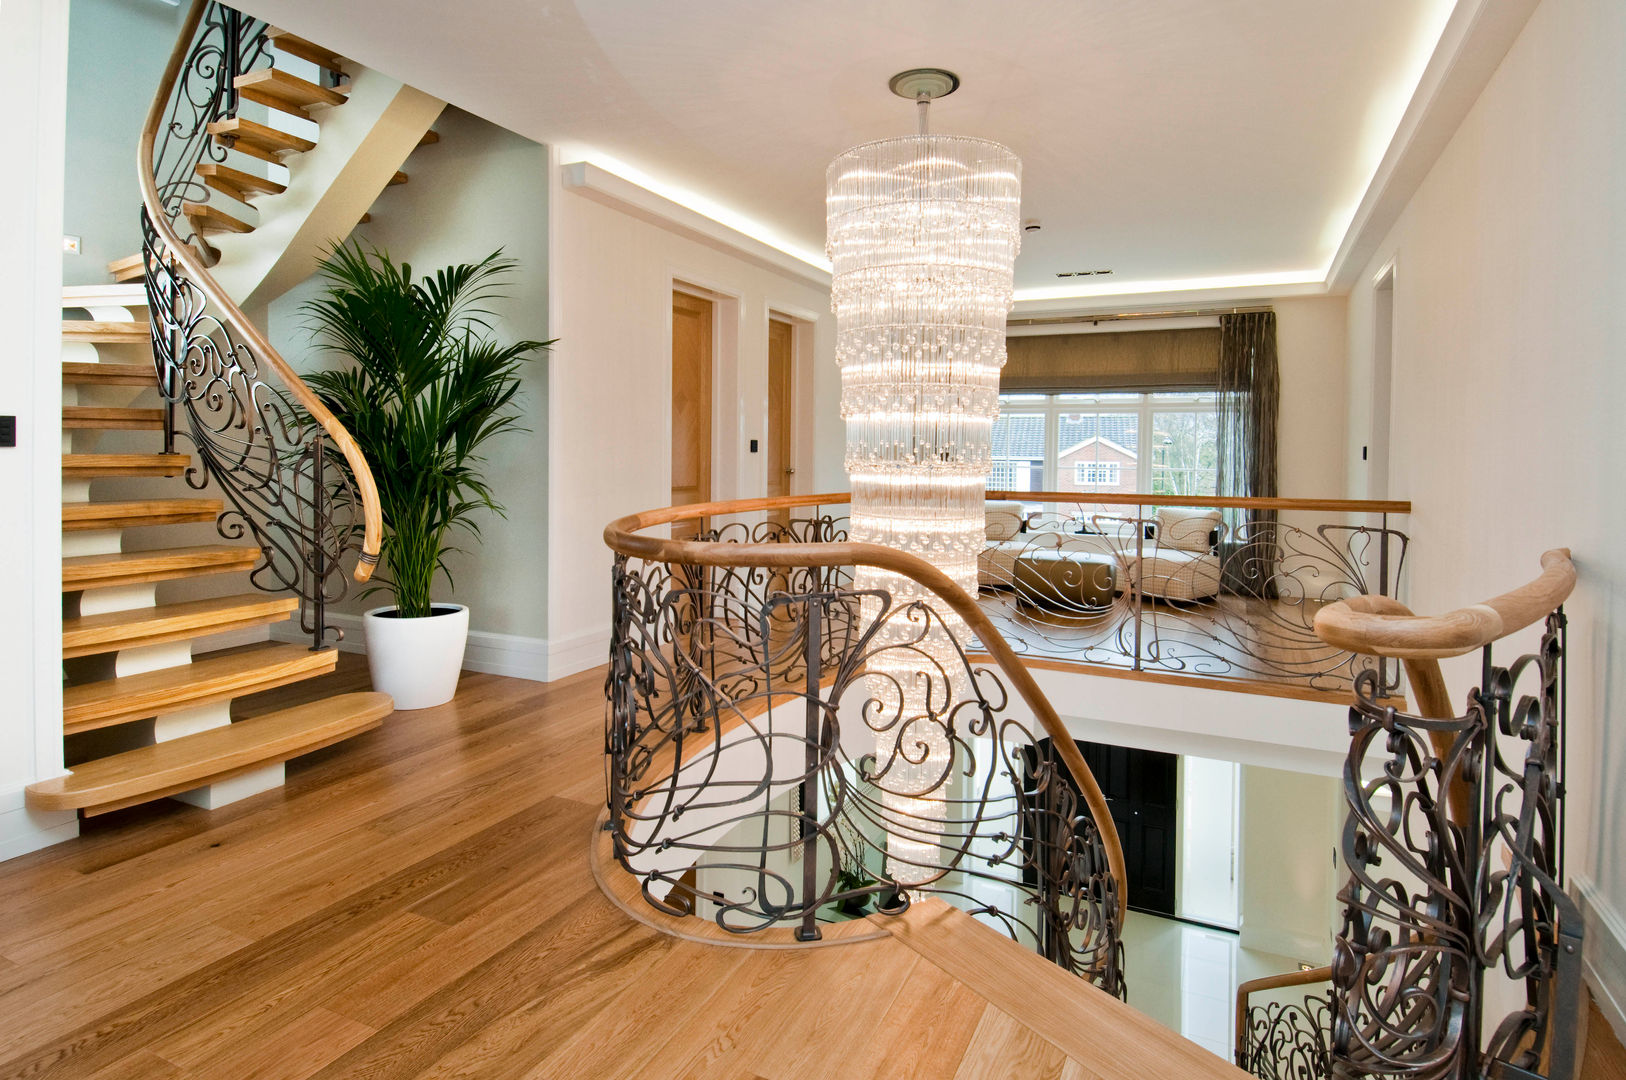 BESPOKE CHANDELIER AND STAIRCASE Shandler Homes Ltd 現代風玄關、走廊與階梯